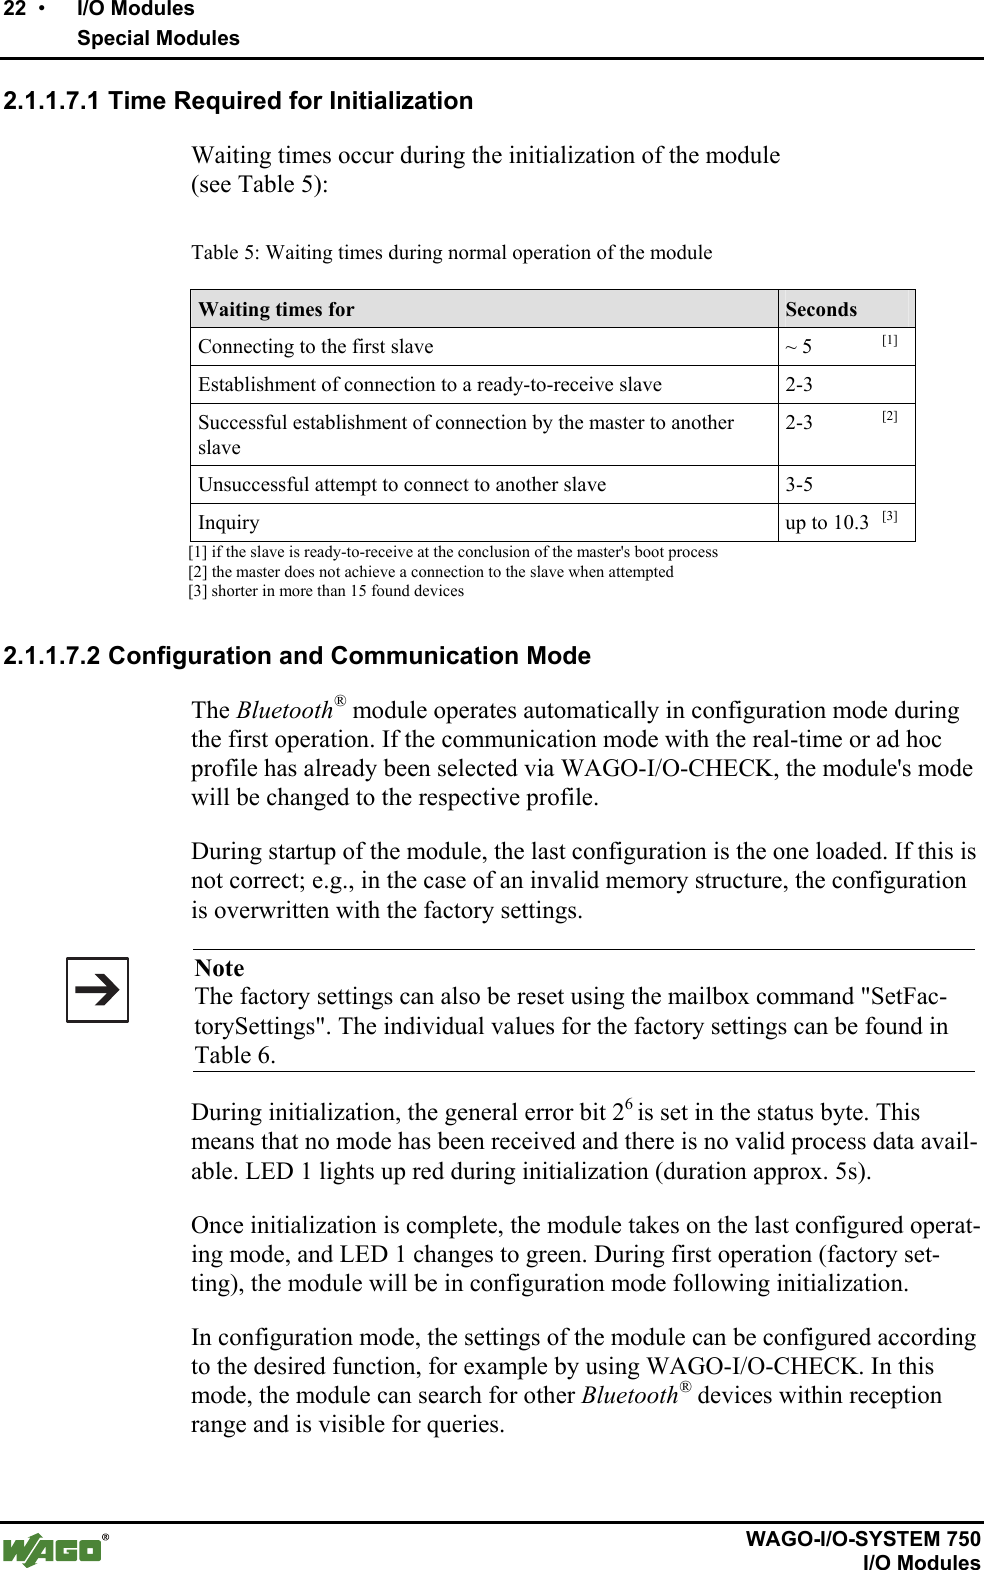 22  •    I/O Modules     Special Modules       WAGO-I/O-SYSTEM 750   I/O Modules 2.1.1.7.1 Time Required for Initialization Waiting times occur during the initialization of the module  (see Table 5):  Table 5: Waiting times during normal operation of the module Waiting times for  Seconds Connecting to the first slave  ~ 5       [1] Establishment of connection to a ready-to-receive slave  2-3  Successful establishment of connection by the master to another slave 2-3       [2] Unsuccessful attempt to connect to another slave  3-5  Inquiry  up to 10.3   [3]              [1] if the slave is ready-to-receive at the conclusion of the master&apos;s boot process              [2] the master does not achieve a connection to the slave when attempted              [3] shorter in more than 15 found devices   2.1.1.7.2 Configuration and Communication Mode The Bluetooth® module operates automatically in configuration mode during the first operation. If the communication mode with the real-time or ad hoc profile has already been selected via WAGO-I/O-CHECK, the module&apos;s mode will be changed to the respective profile. During startup of the module, the last configuration is the one loaded. If this is not correct; e.g., in the case of an invalid memory structure, the configuration is overwritten with the factory settings.   Note The factory settings can also be reset using the mailbox command &quot;SetFac-torySettings&quot;. The individual values for the factory settings can be found in Table 6. During initialization, the general error bit 26 is set in the status byte. This means that no mode has been received and there is no valid process data avail-able. LED 1 lights up red during initialization (duration approx. 5s). Once initialization is complete, the module takes on the last configured operat-ing mode, and LED 1 changes to green. During first operation (factory set-ting), the module will be in configuration mode following initialization. In configuration mode, the settings of the module can be configured according to the desired function, for example by using WAGO-I/O-CHECK. In this mode, the module can search for other Bluetooth® devices within reception range and is visible for queries.  